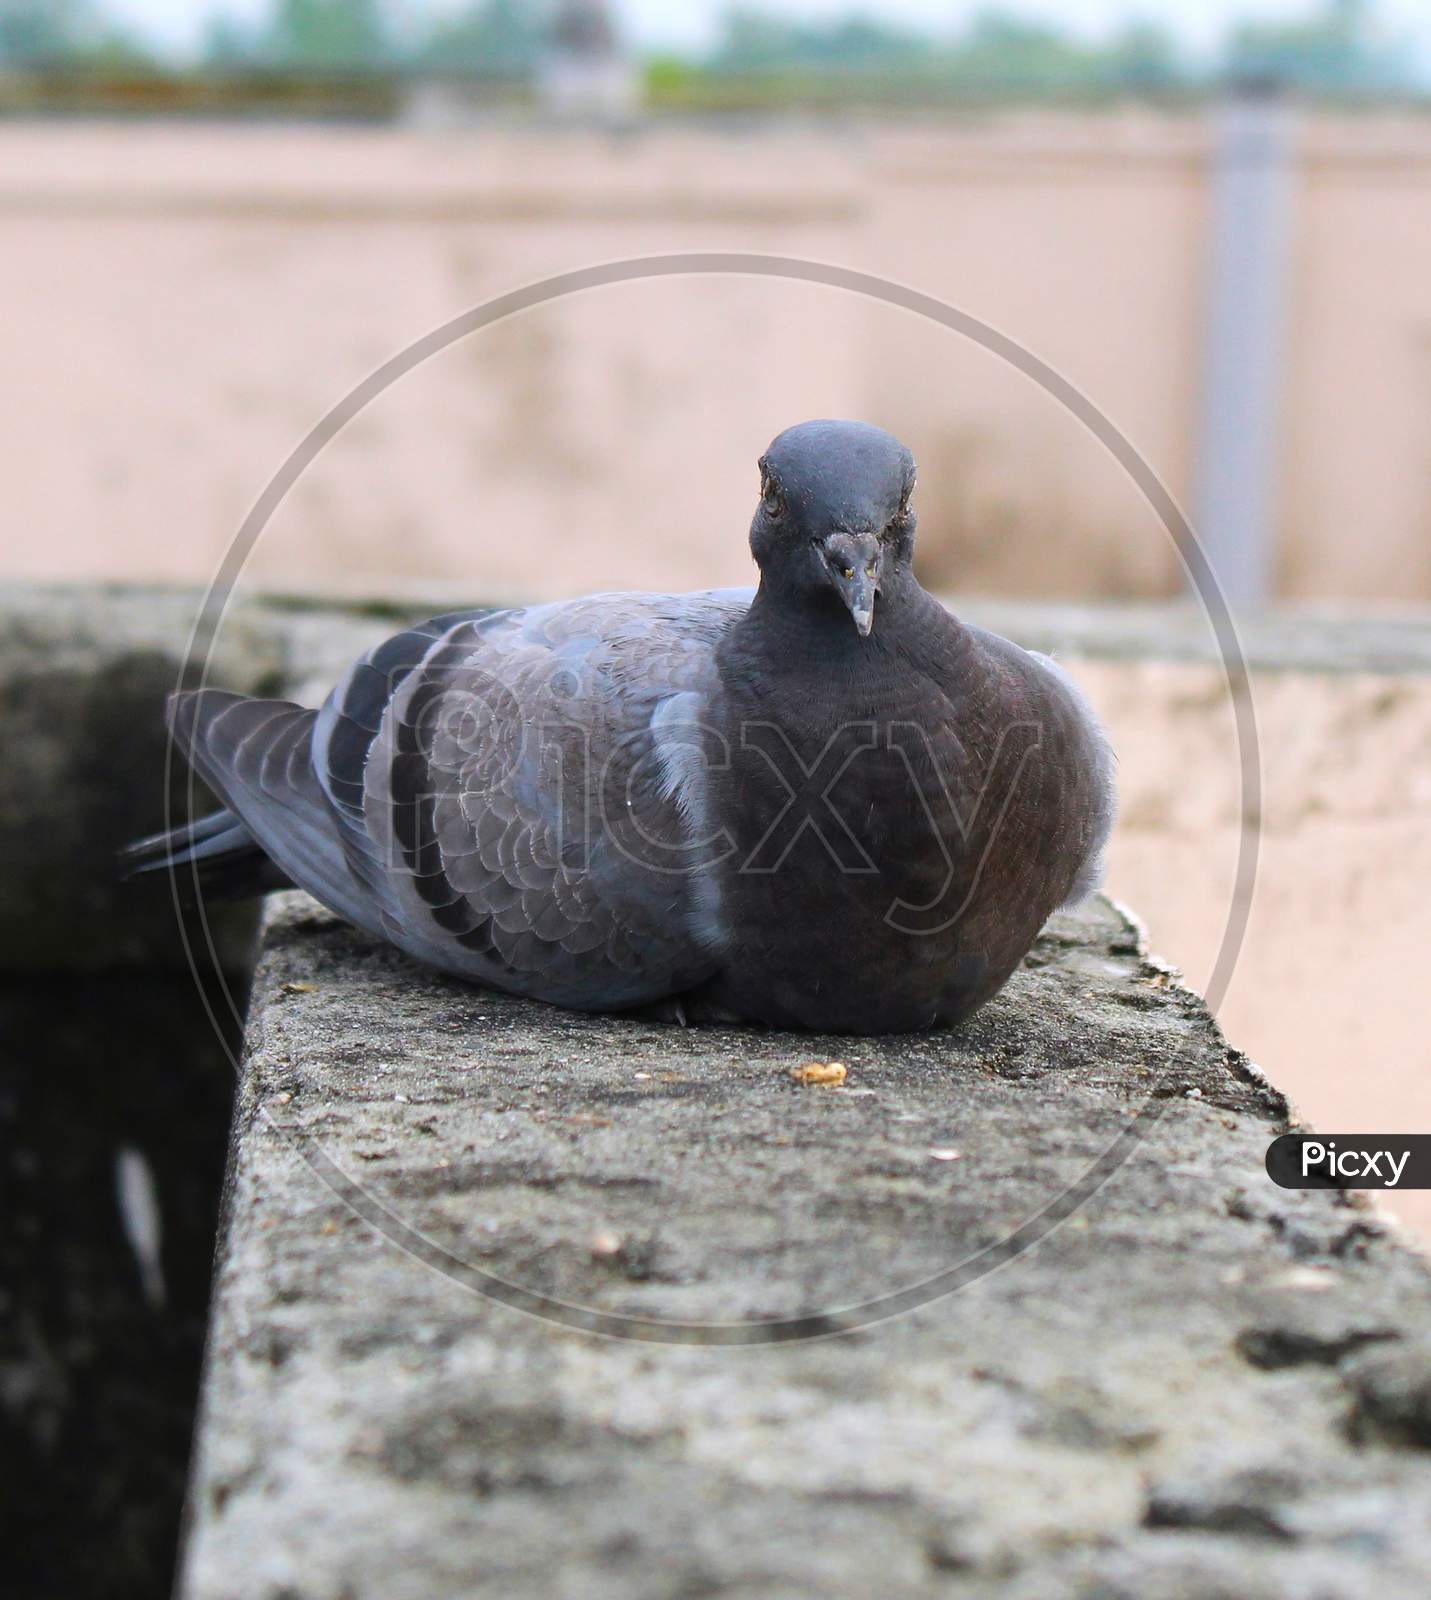 A Pigeon sitting on a Wall.